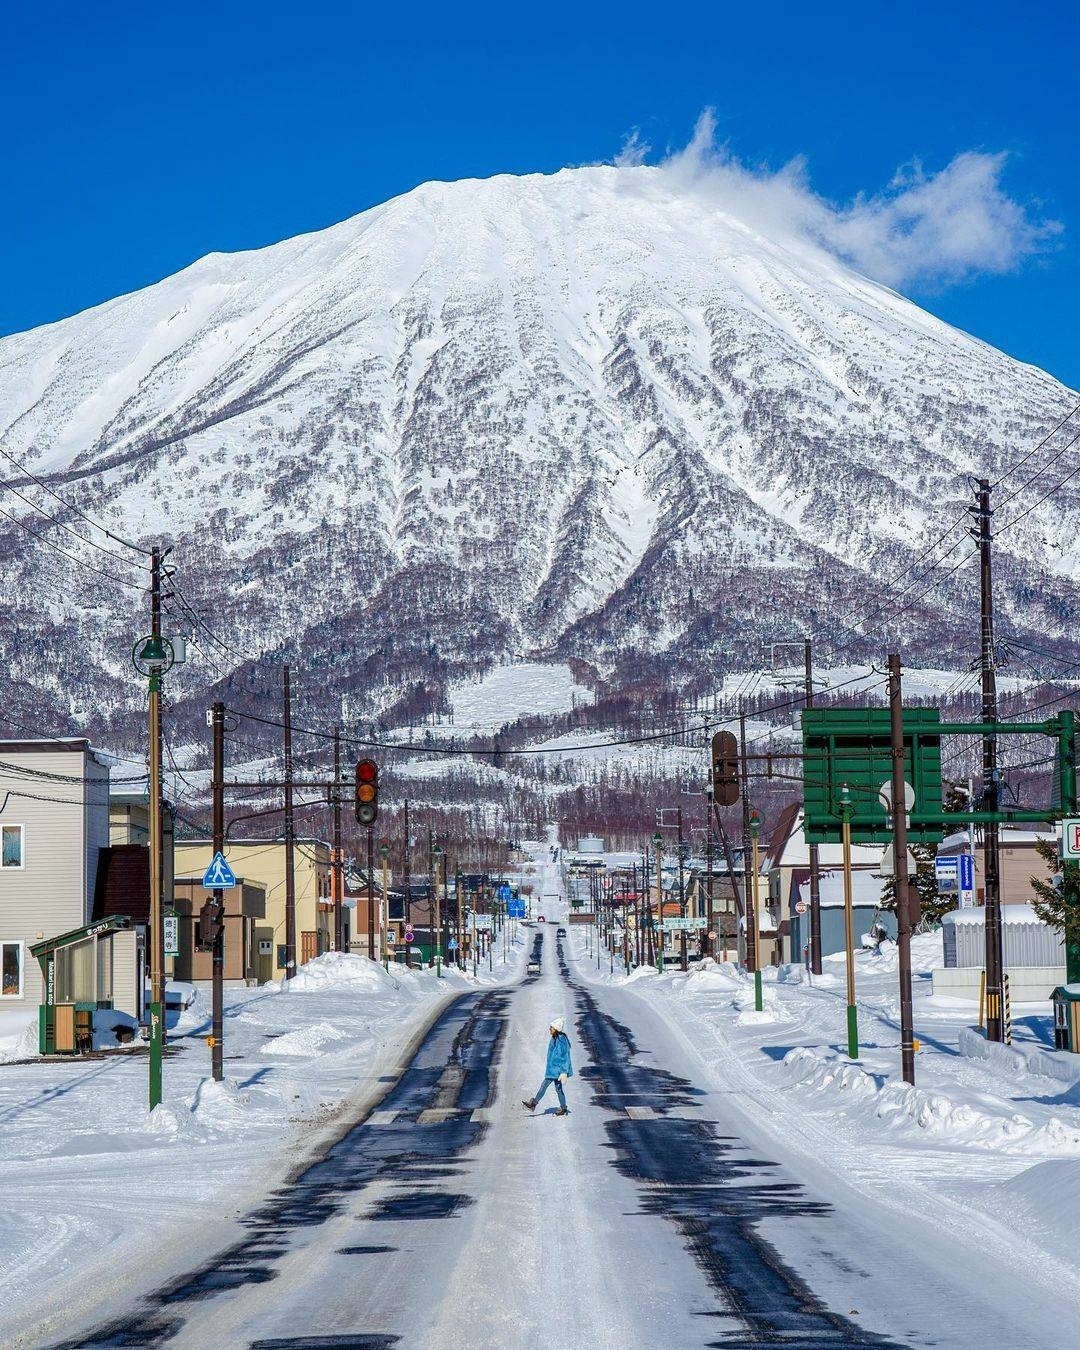 Japan Travel This Is Mount Yotei In Hokkaido Which Often Gets Compared To Mount Fuji Because Alo Japan